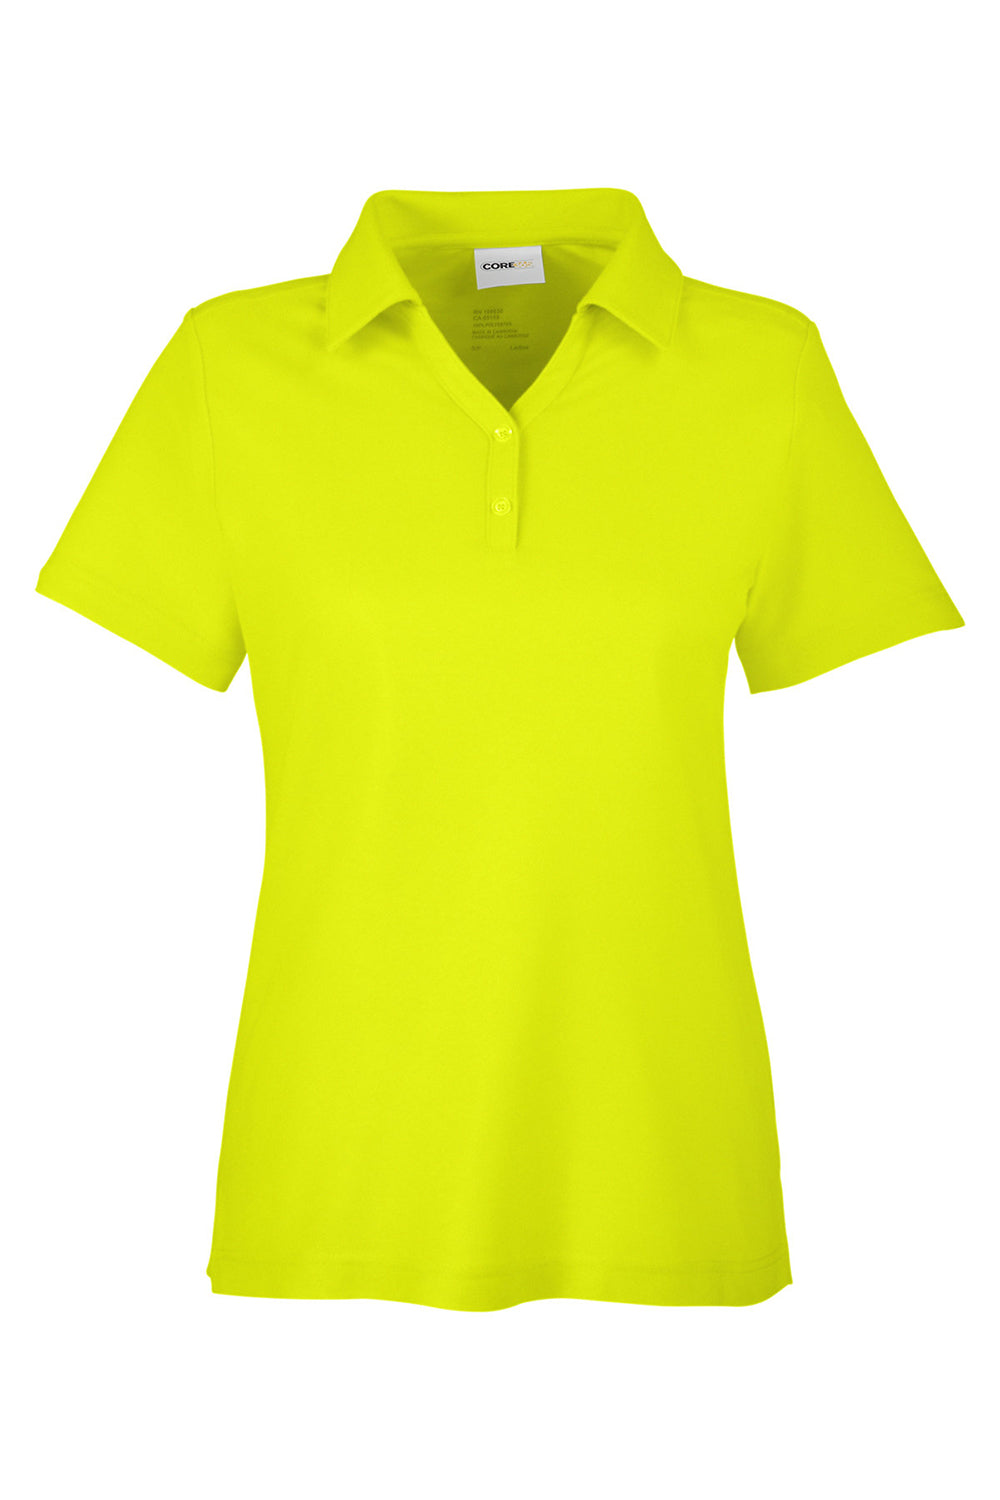 Core 365 CE112W Womens Fusion ChromaSoft Performance Moisture Wicking Pique Short Sleeve Polo Shirt Safety Yellow Flat Front